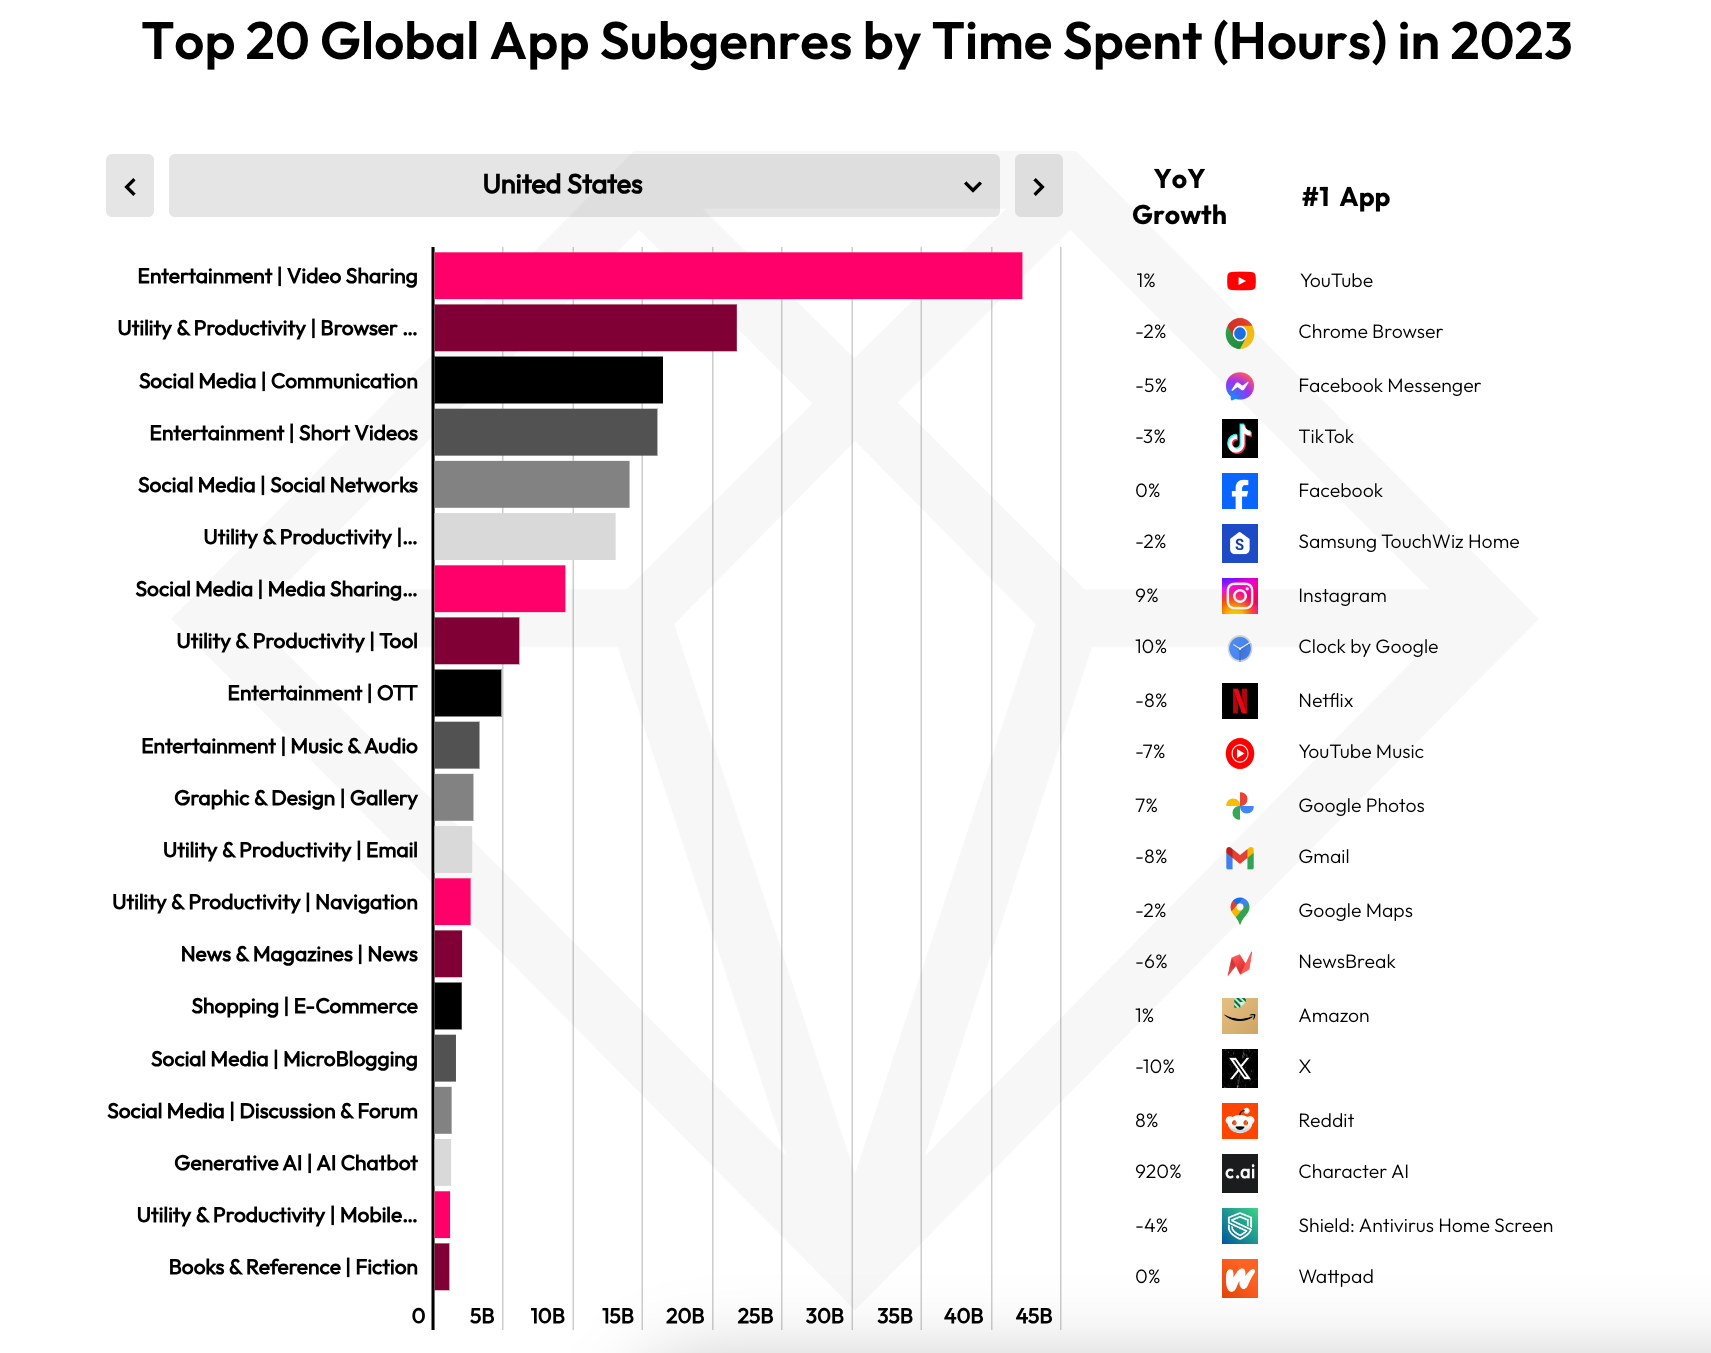 Image Credit–data.ai - These apps ruled over US residents' screens and wallets in 2023